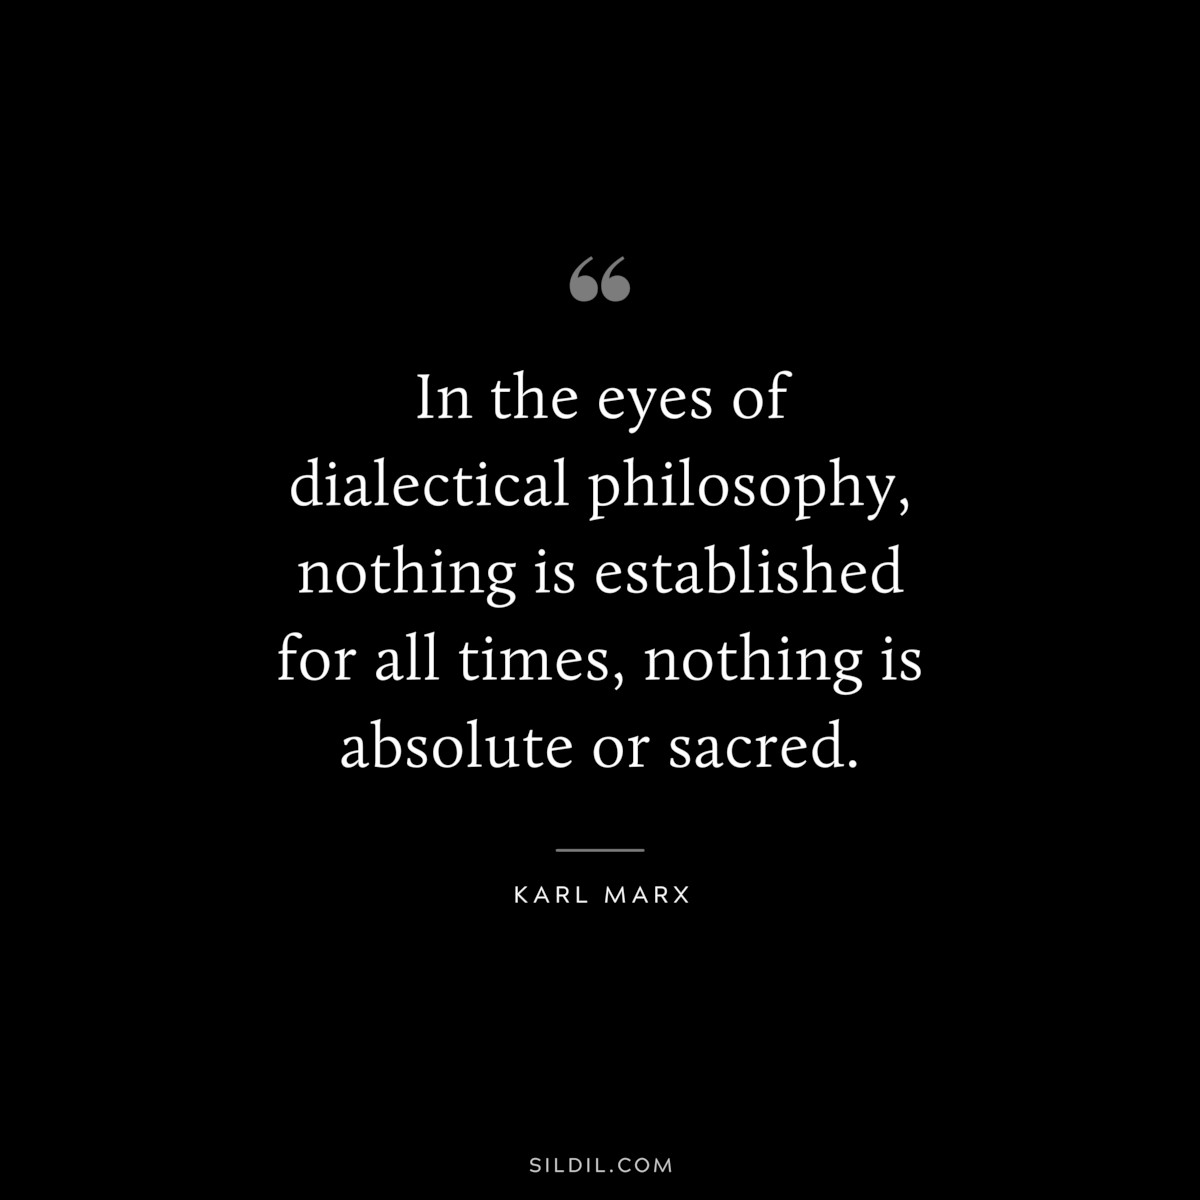 In the eyes of dialectical philosophy, nothing is established for all times, nothing is absolute or sacred. ― Karl Marx